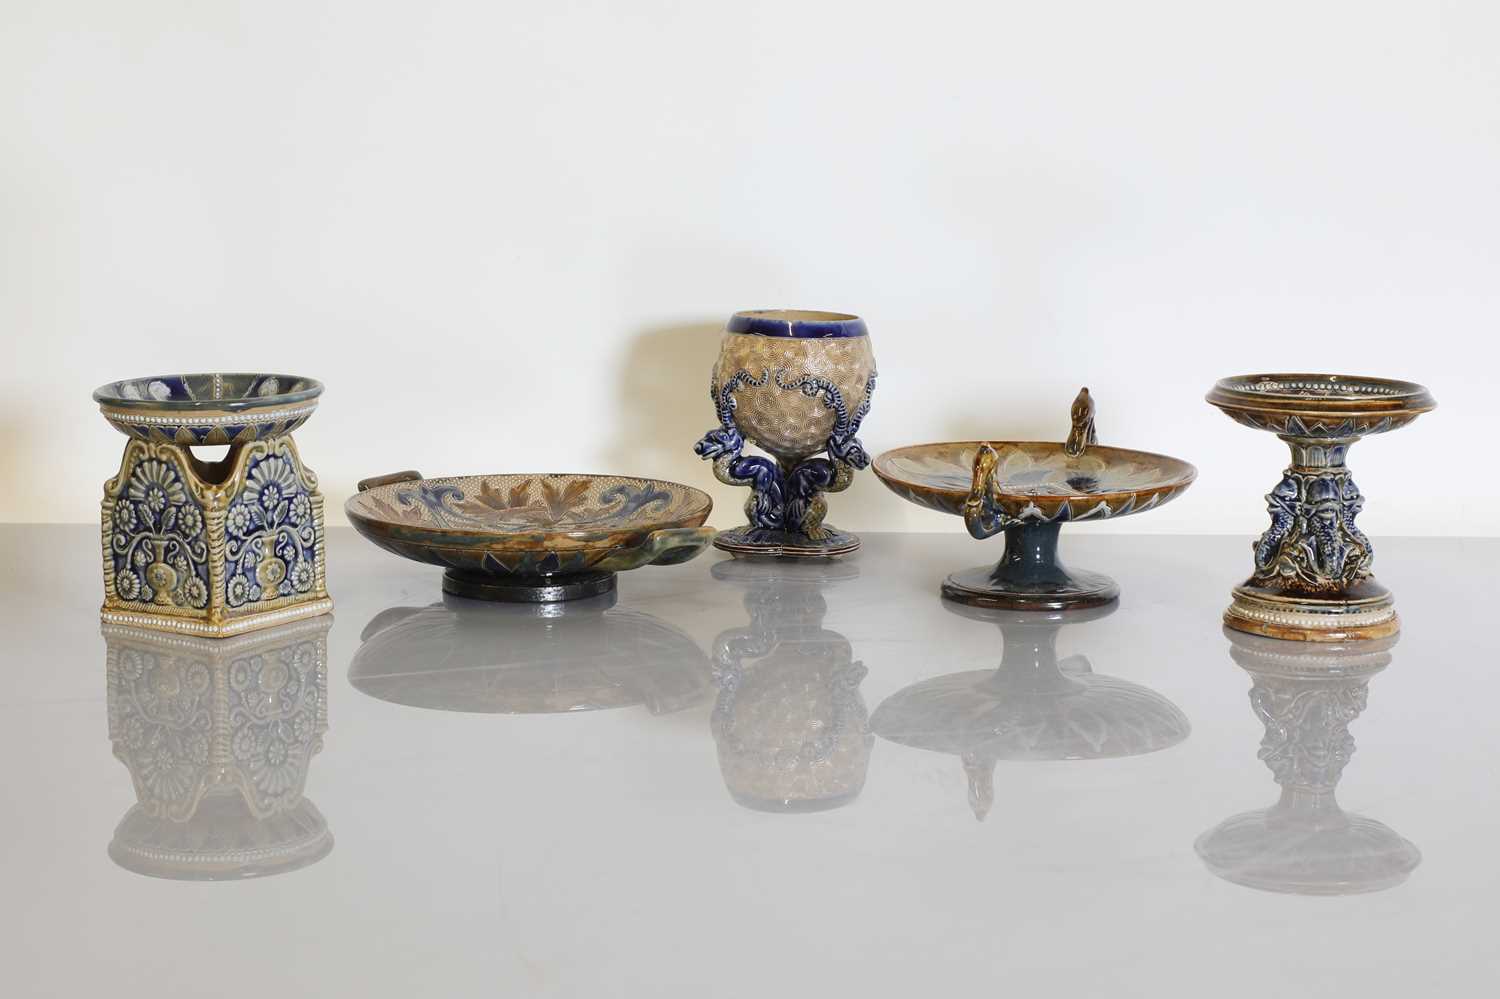 Lot 92 - A collection of Doulton Lambeth stoneware tazzas, stands and a match holder